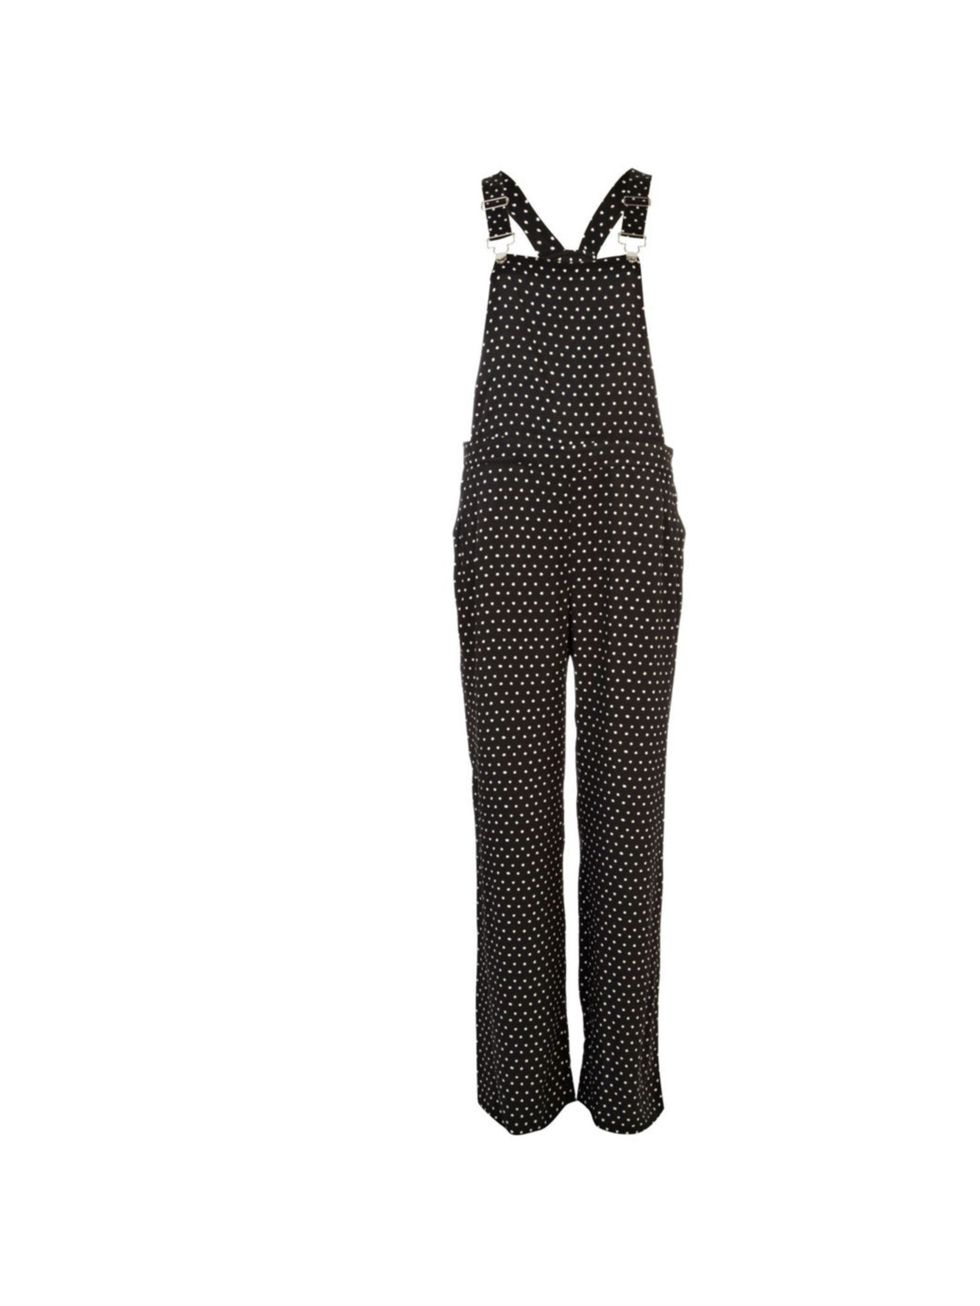 <p>Since popping up at 3.1 Phillip Lim and Moschino, dungarees are back. Spotted everywhere at London Fashion Week, trial the trend with a high street version... <a href="http://www.riverisland.com/women/playsuits--jumpsuits/dungarees/Black-and-white-polk